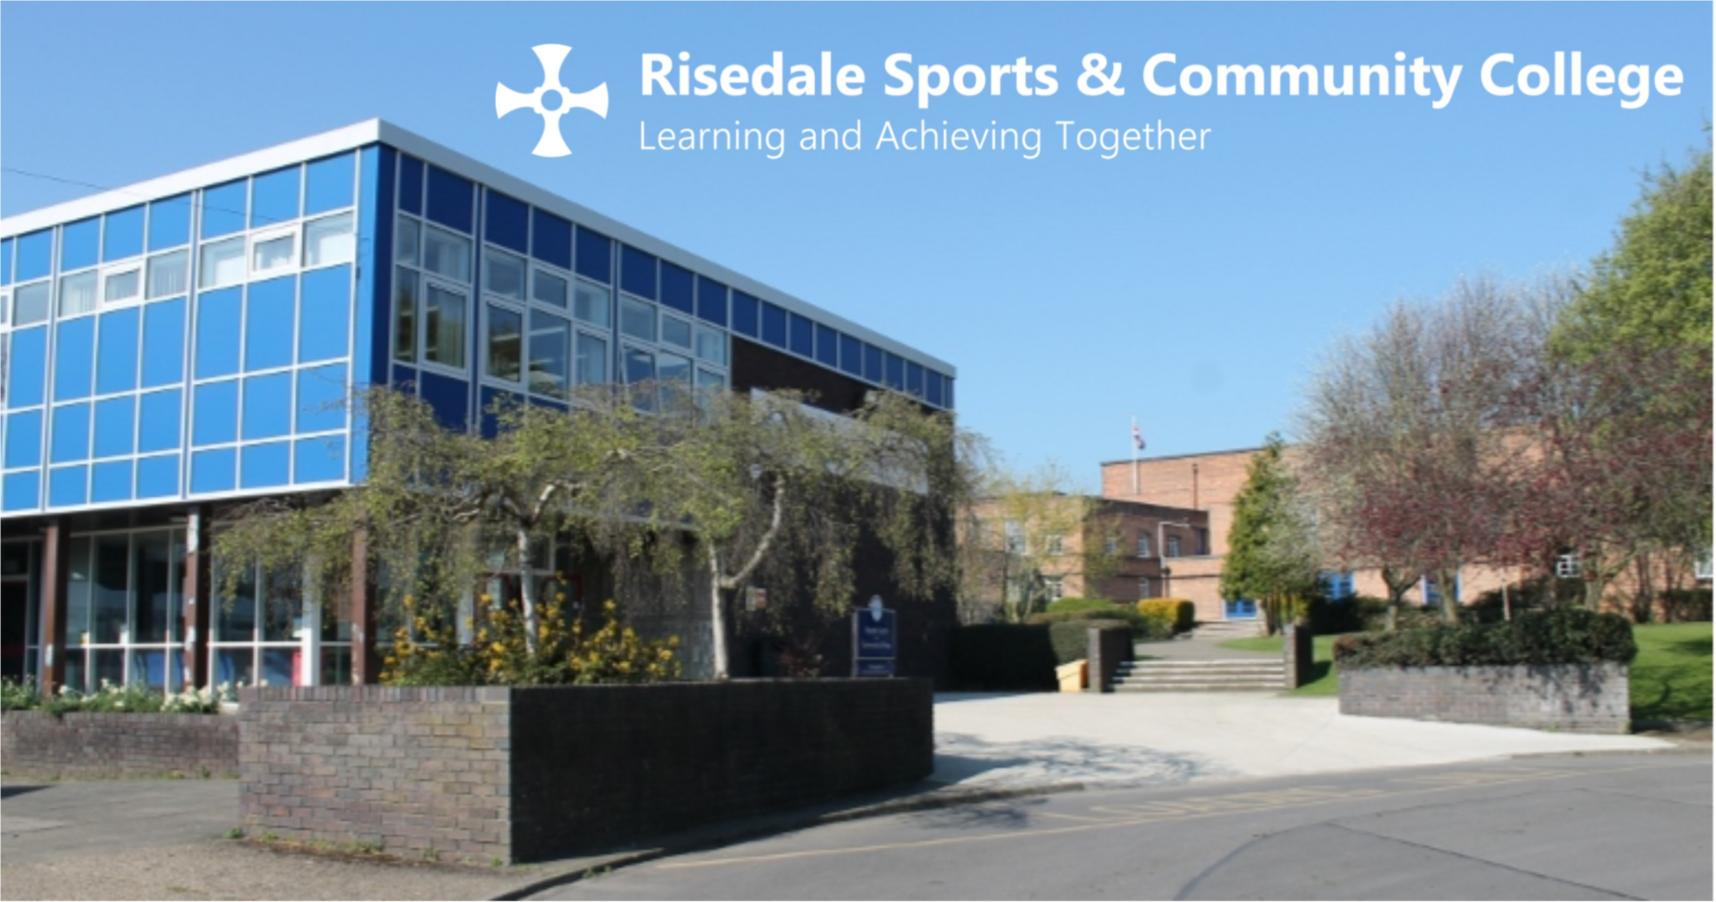 Risedale School (c) Risedale Sports and Community College